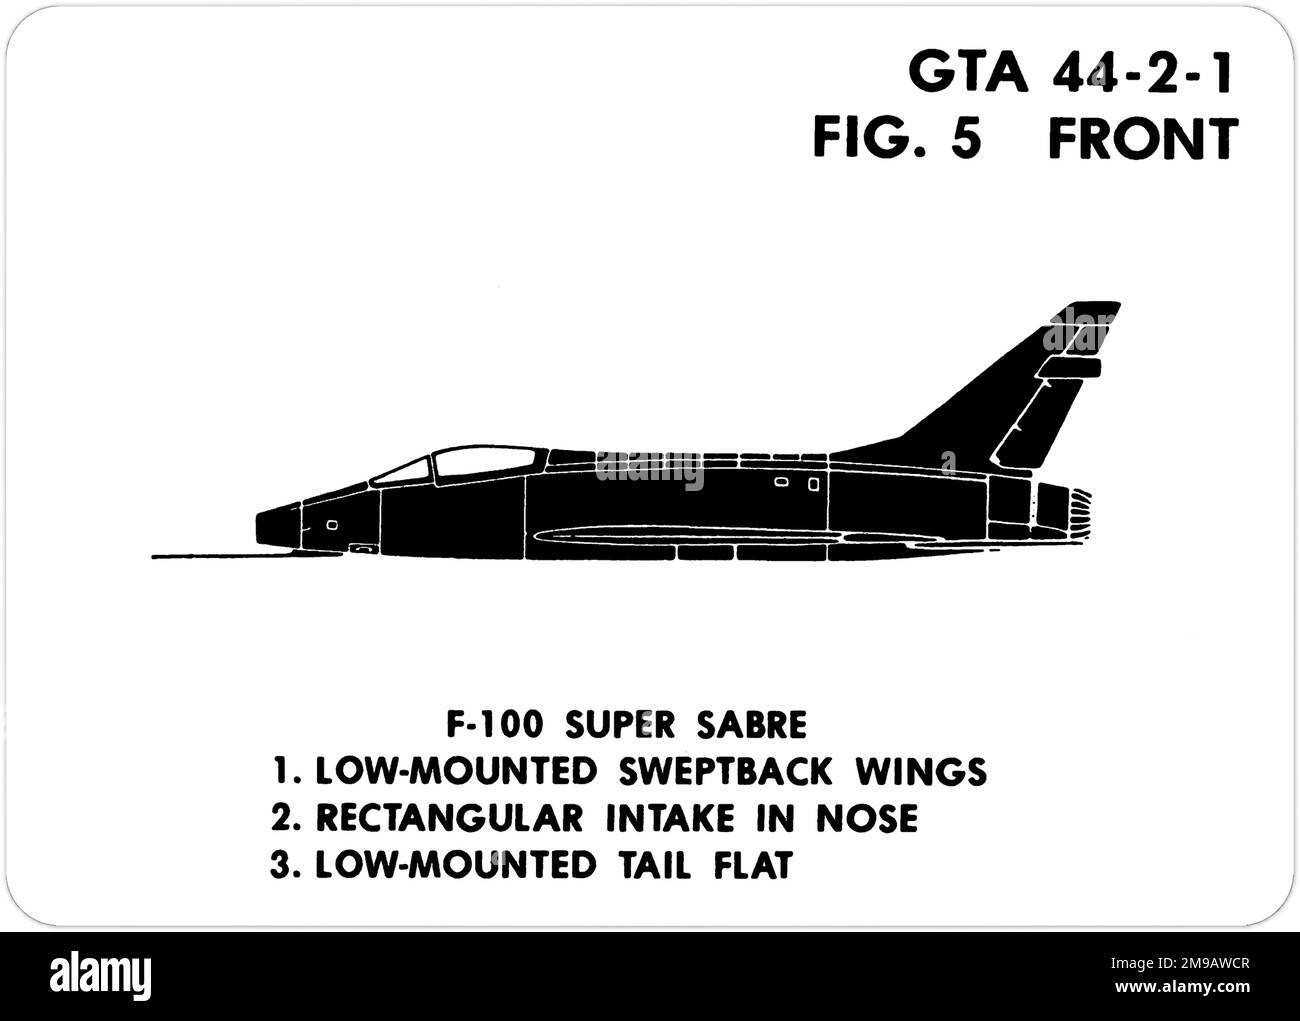 North American F-100D Super Sabre. This is one of the series of Graphics Training Aids (GTA) used by the United States Army to train their personnel to recognize friendly and hostile aircraft. This particular set, GTA 44-2-1, was issued in July1977. The set features aircraft from: Canada, Italy, United Kingdom, United States, and the USSR. Stock Photo